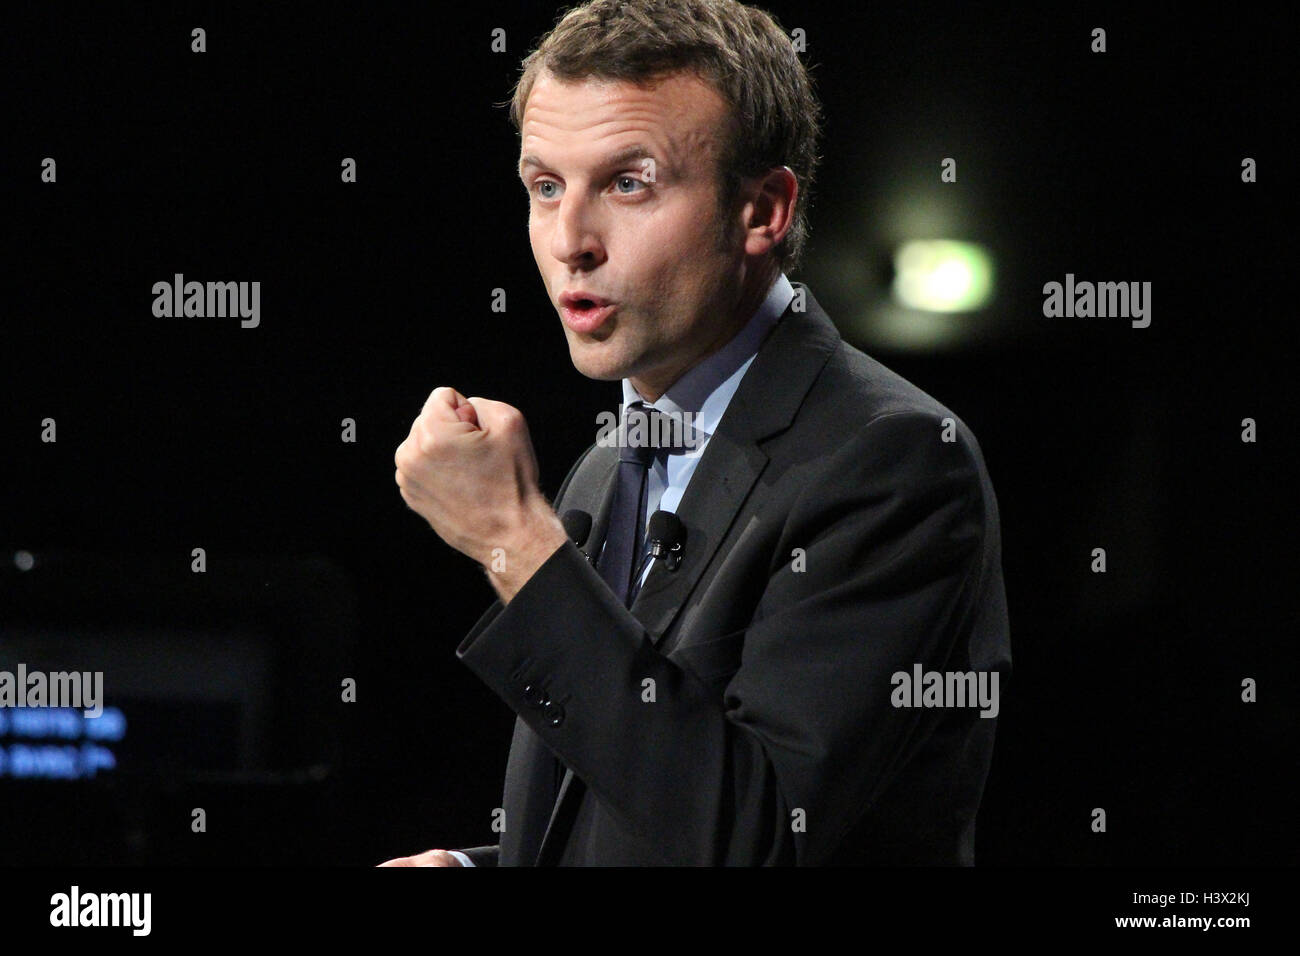 Le Mans, France. 11th October, 2016. Emmanuel Macron delivers his speech on stage during his meeting in Le Mans (France). Credit:  Paul-Marie Guyon/Alamy Live News Stock Photo